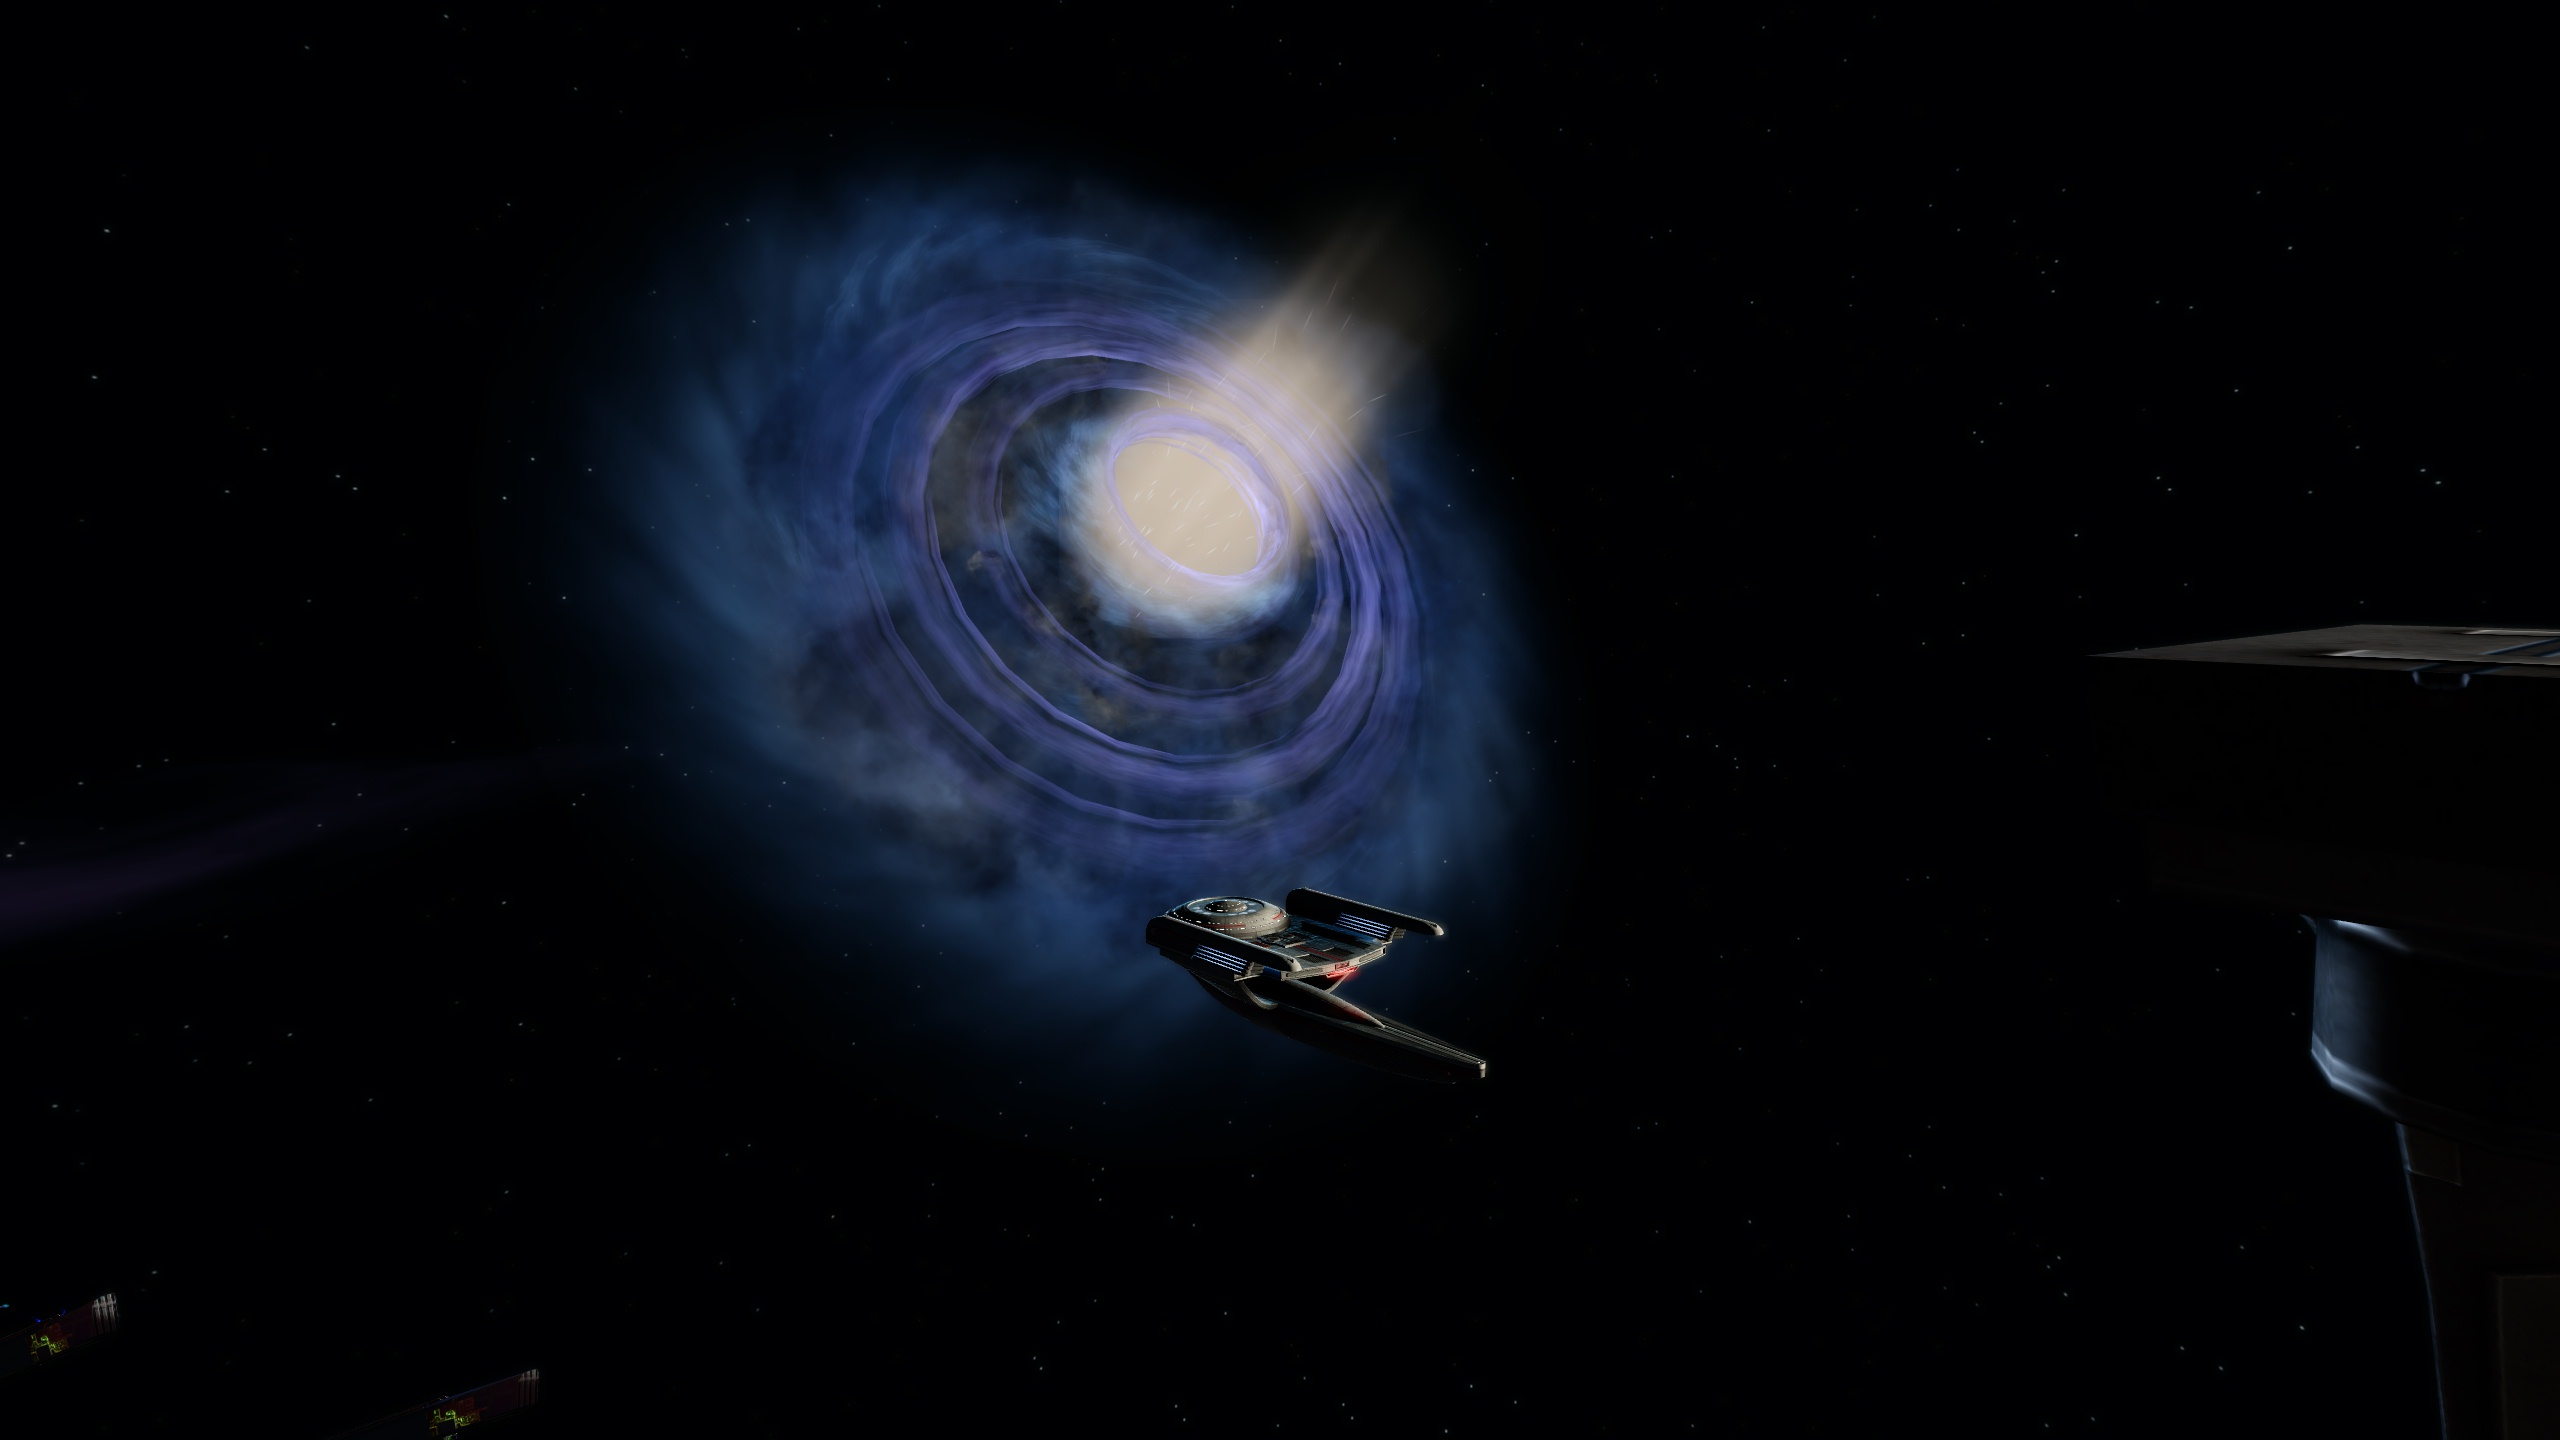 The USS Tookbank at DS9, with a magnificent view of the Wormhole.